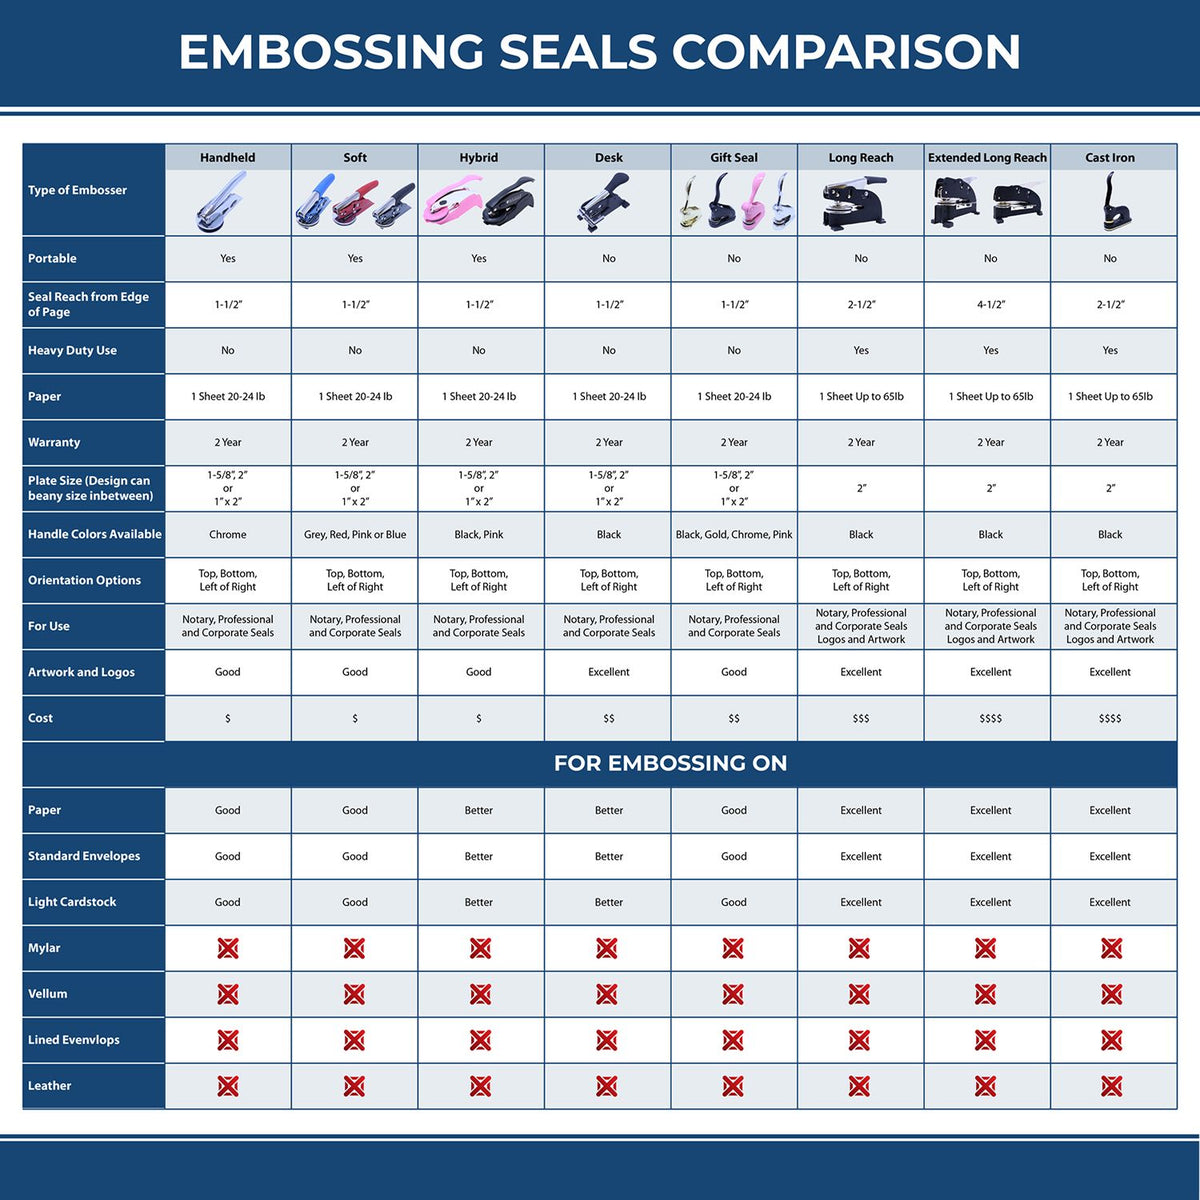 A comparison chart for the different types of mount models available for the Handheld Iowa Architect Seal Embosser.